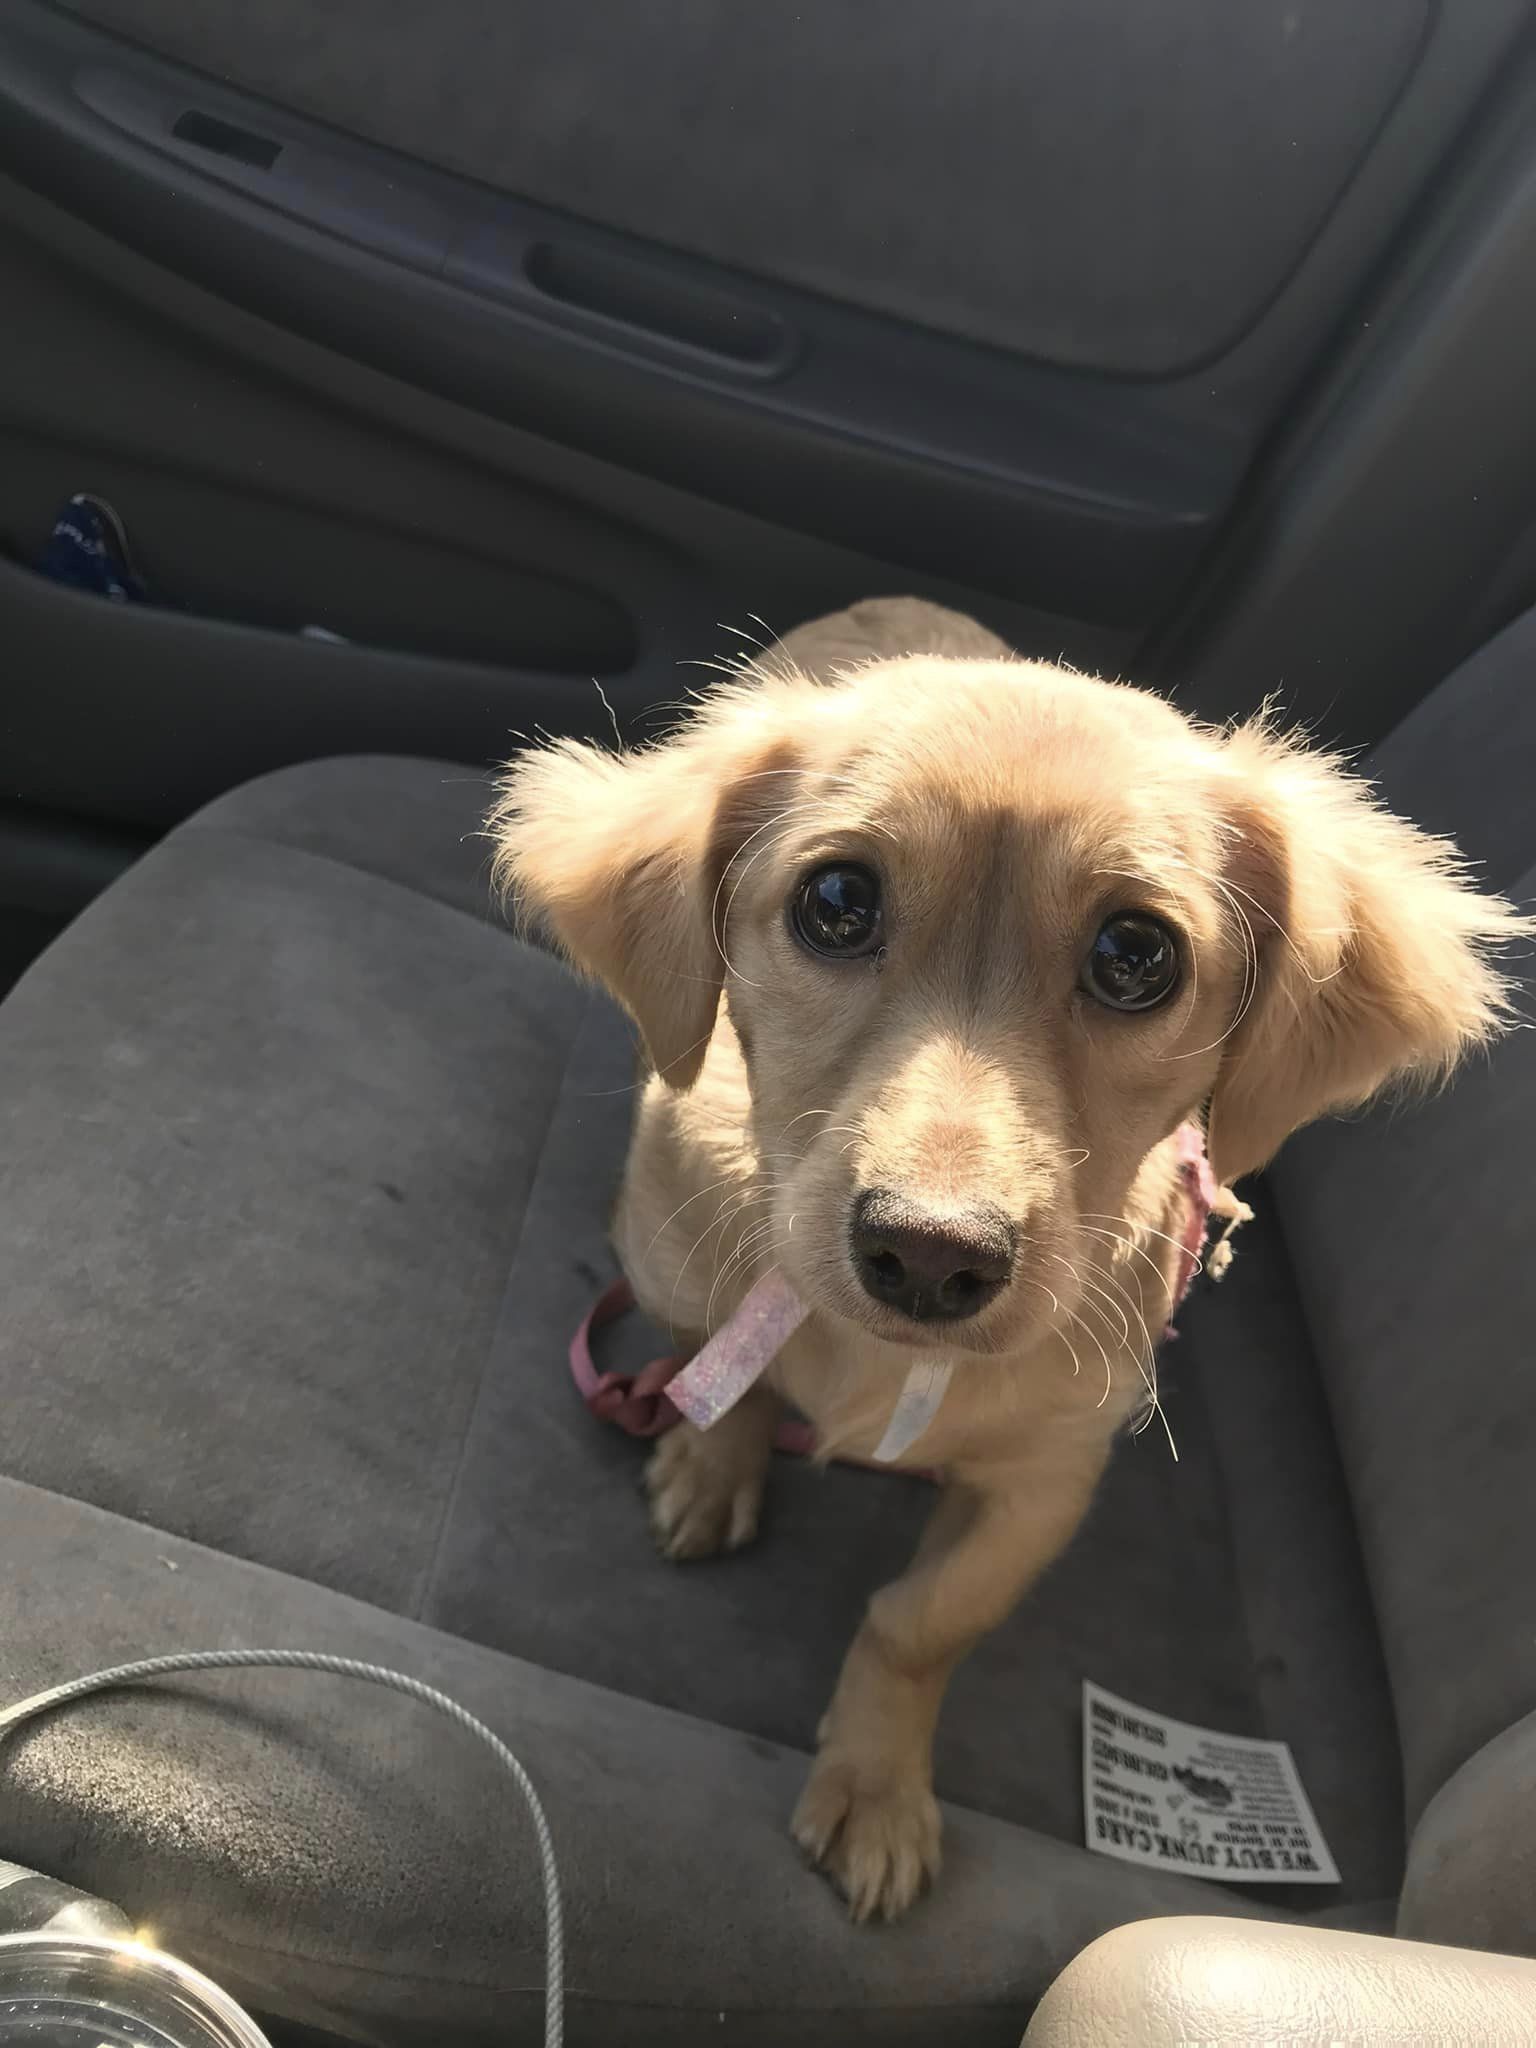 Cici the rescued dachshund mix